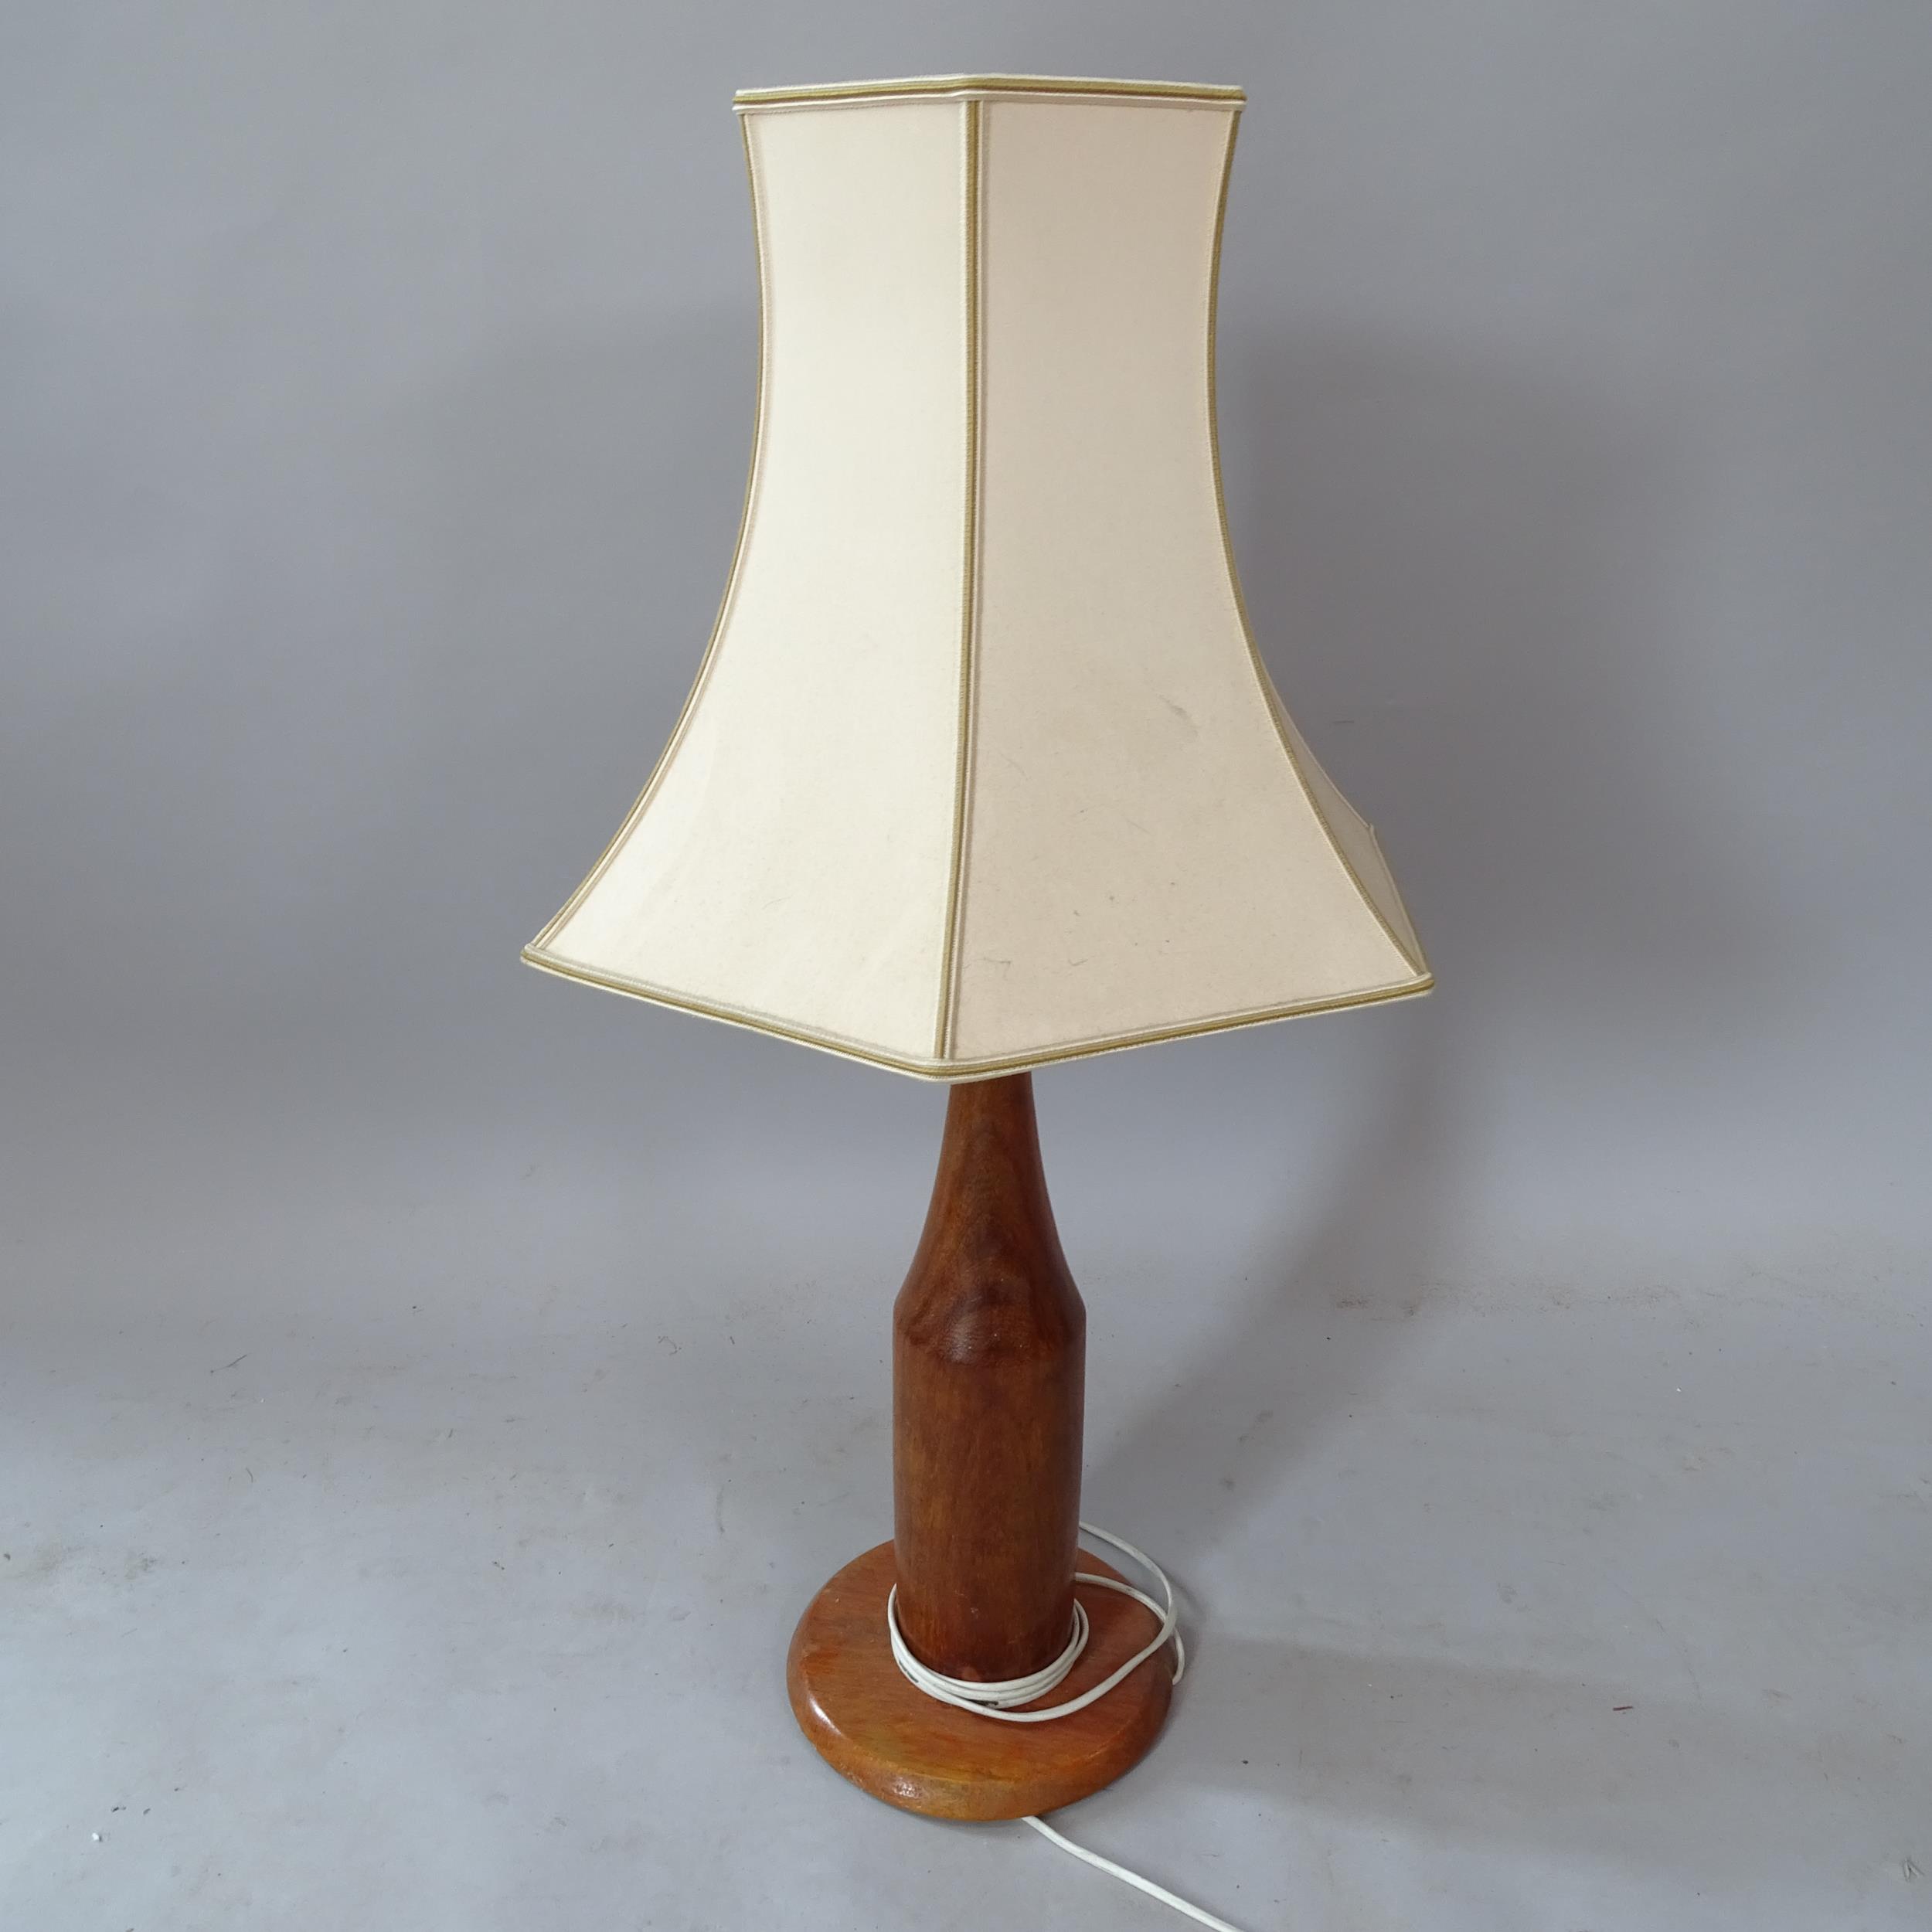 A Vintage mahogany table lamp and shade, height overall 76cm